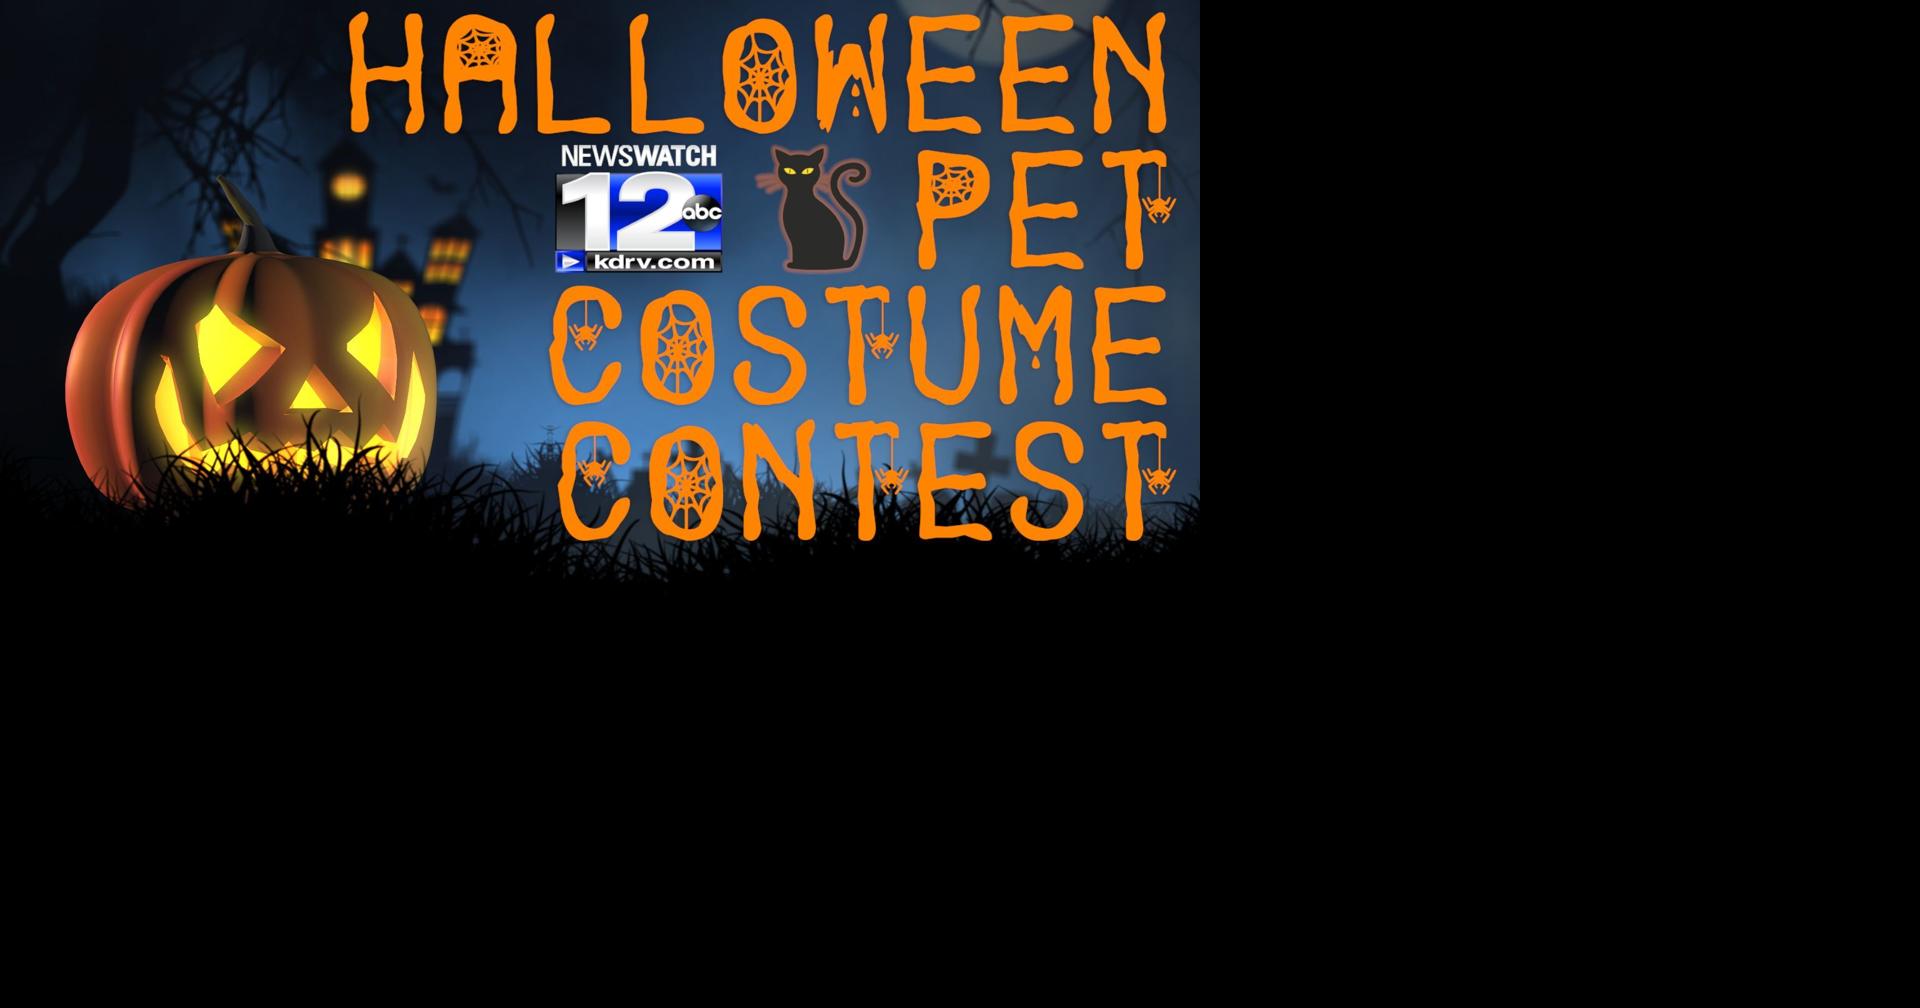 42.1K+ Free Templates for 'Halloween pet costume contest